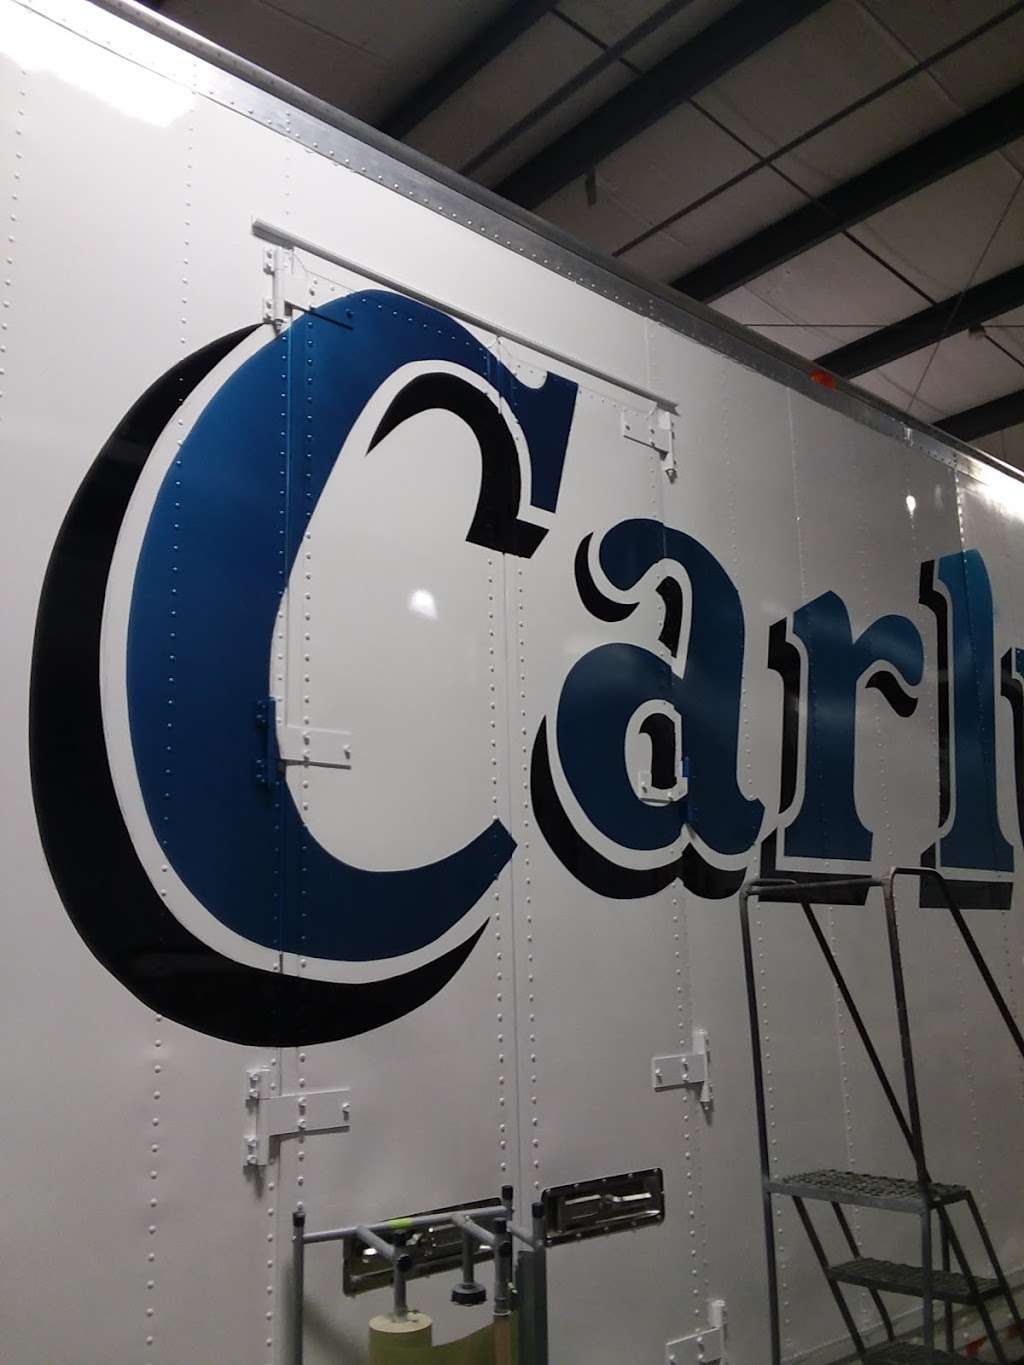 Carlyle Truck and Trailer Repair | 799 W. Young Ave, Warrensburg, MO 64093, USA | Phone: (660) 362-7151